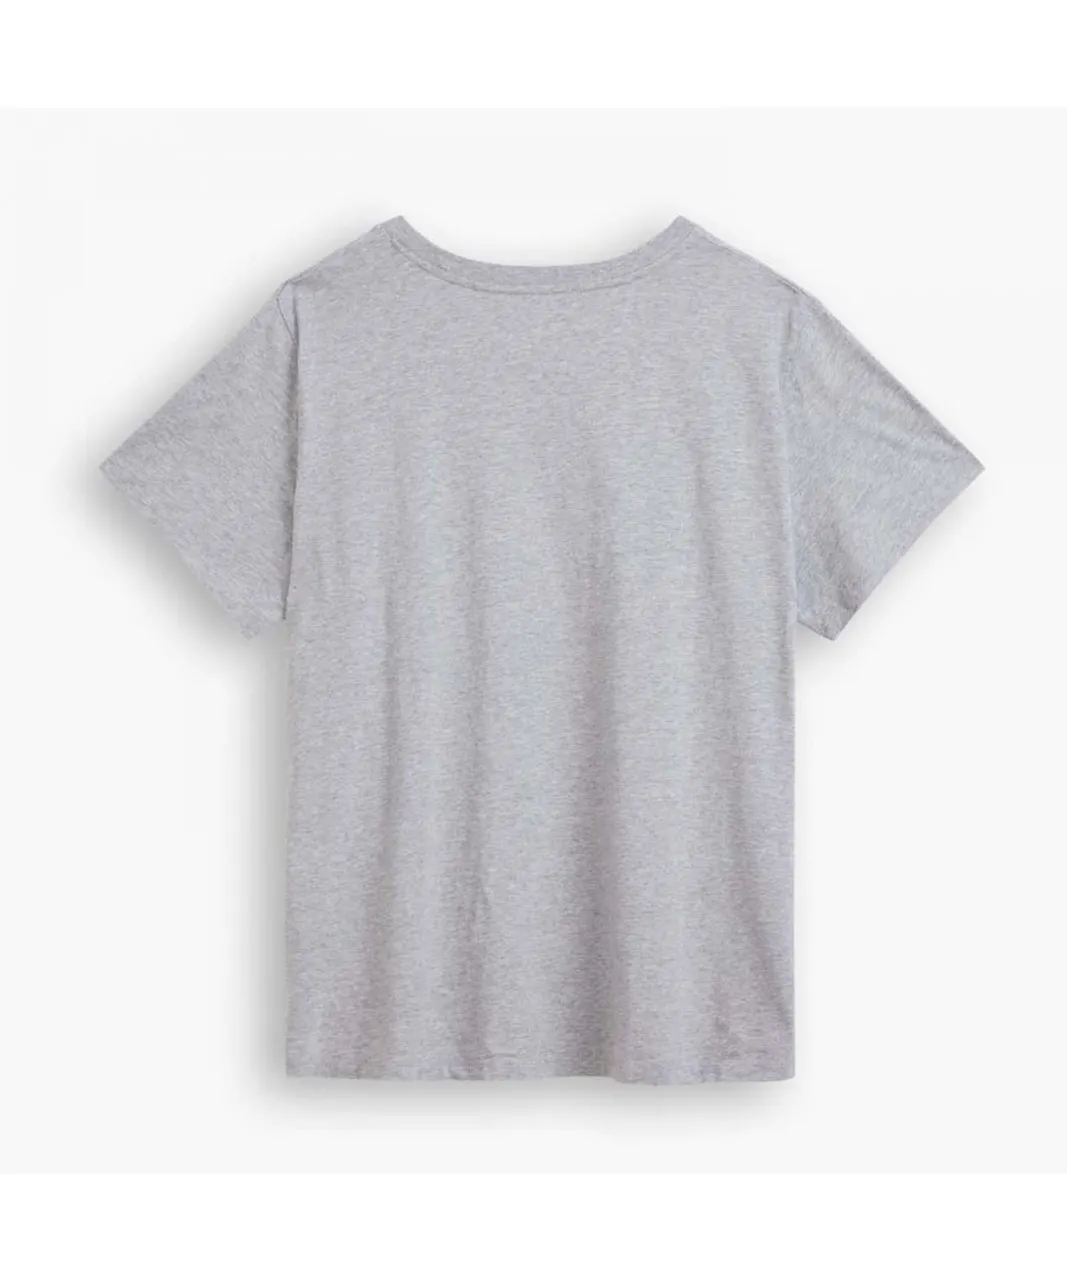 Levi's Womenss Levis Plus Perfect T-Shirt in Grey Heather Cotton